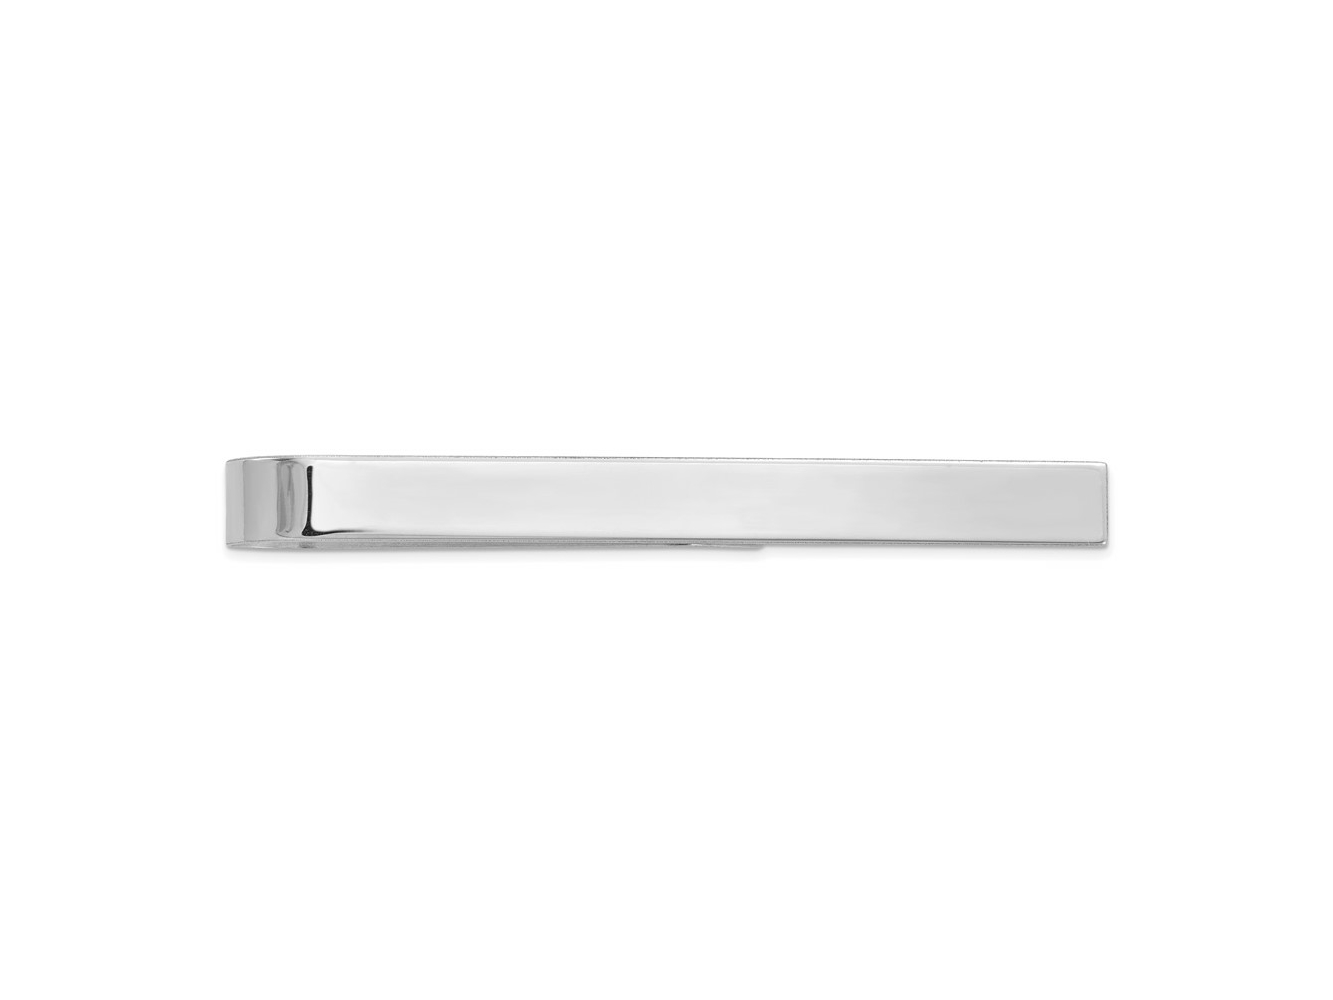 FJC Finejewelers 14 kt White Gold Polished Tie Bar 50 mm x 4.5 mm